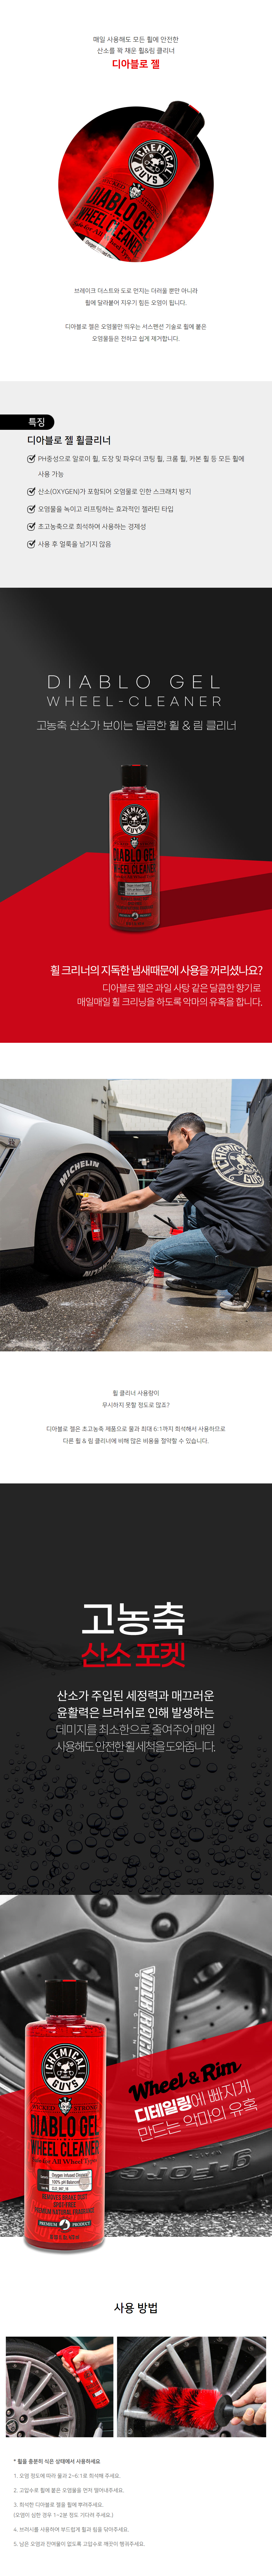 The Best Wheel, How To Rim and Tire Cleaner - Chemical Guys